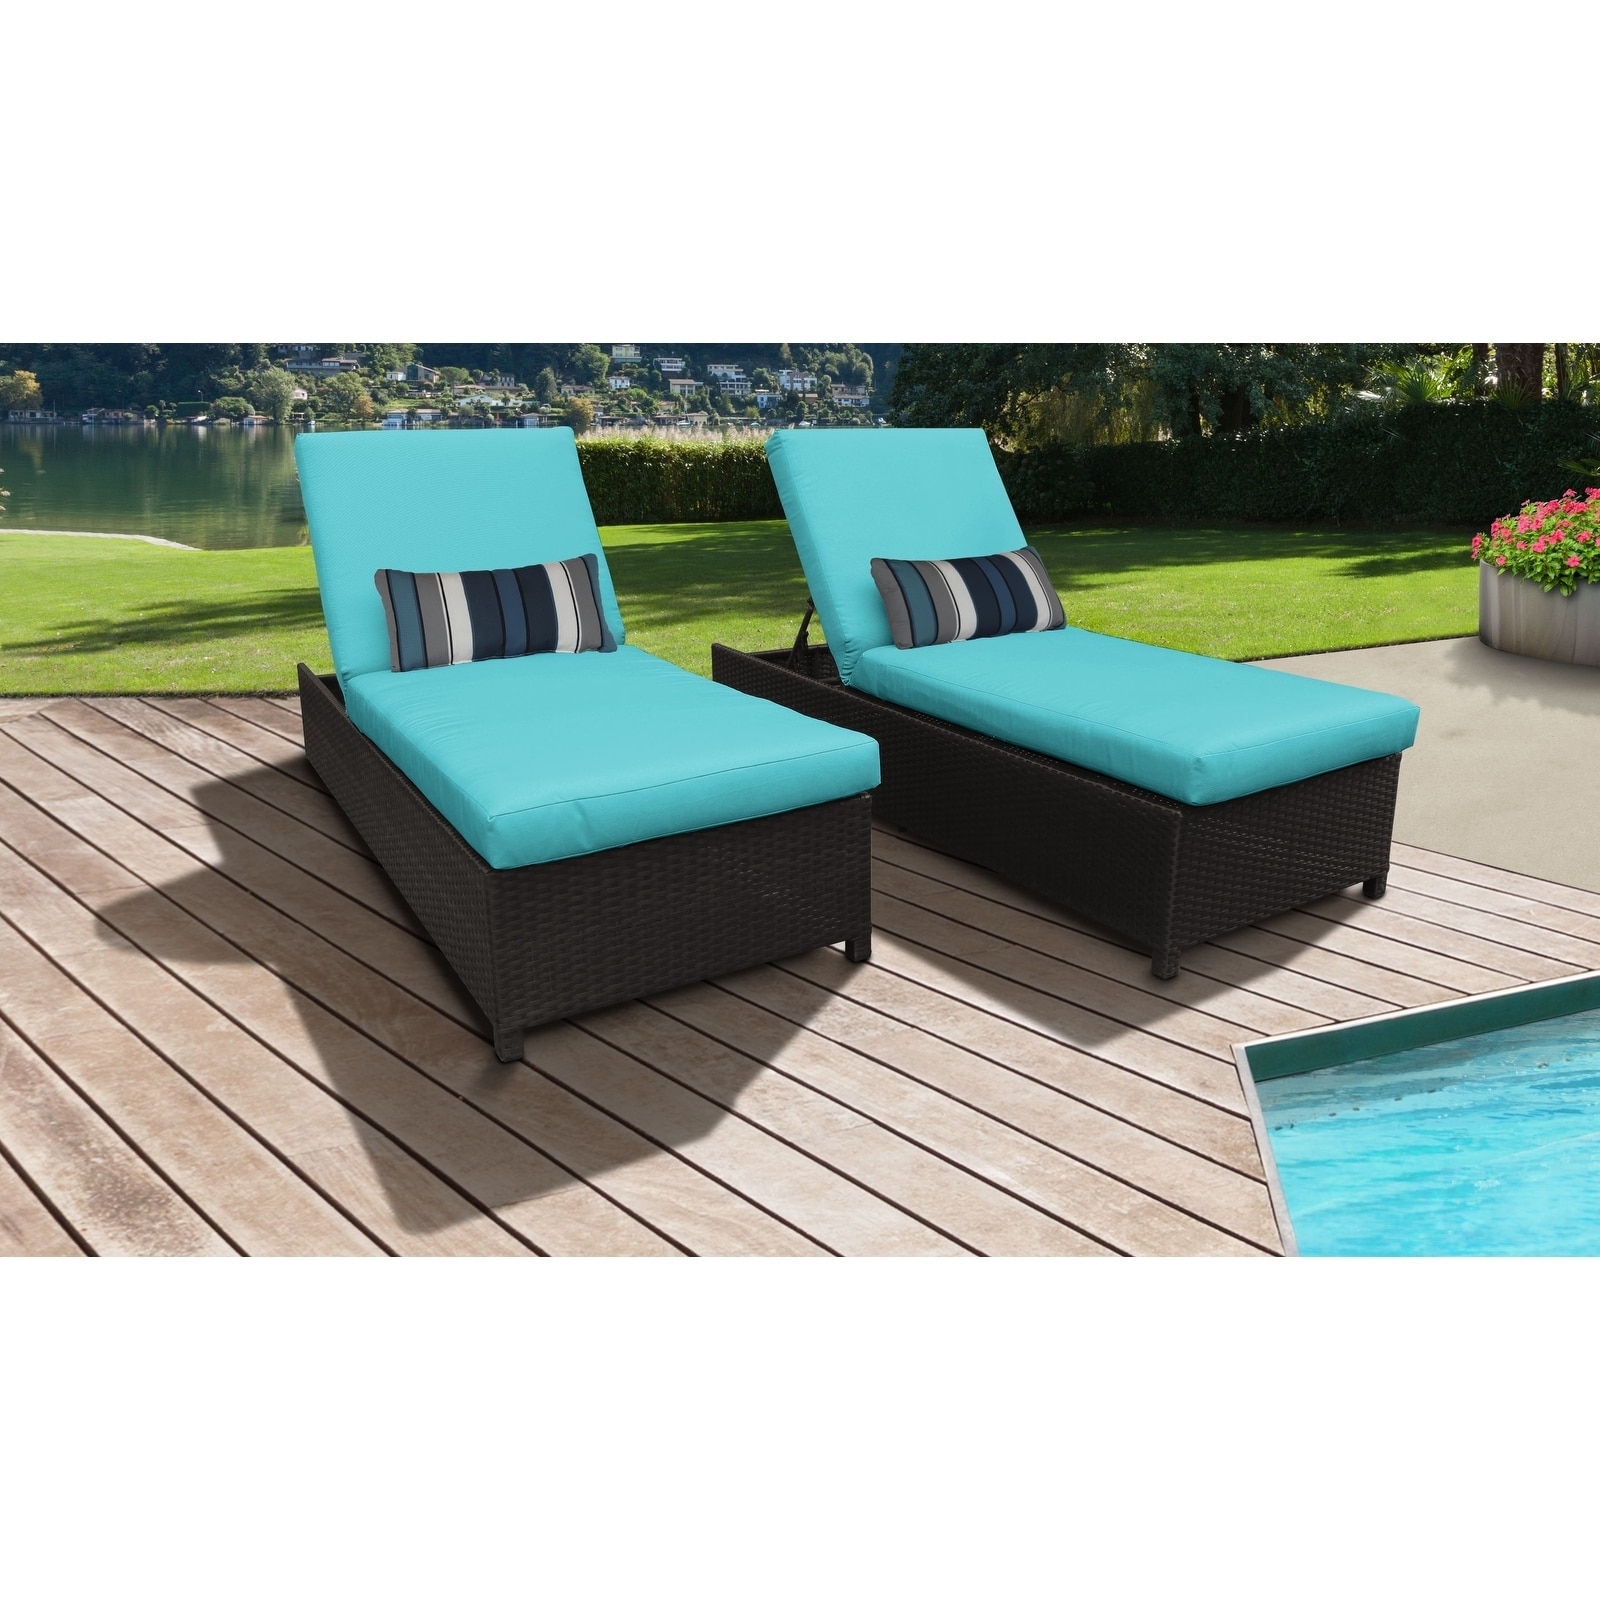 Belle Wheeled Chaise Set Of 2 Outdoor Wicker Patio Furniture